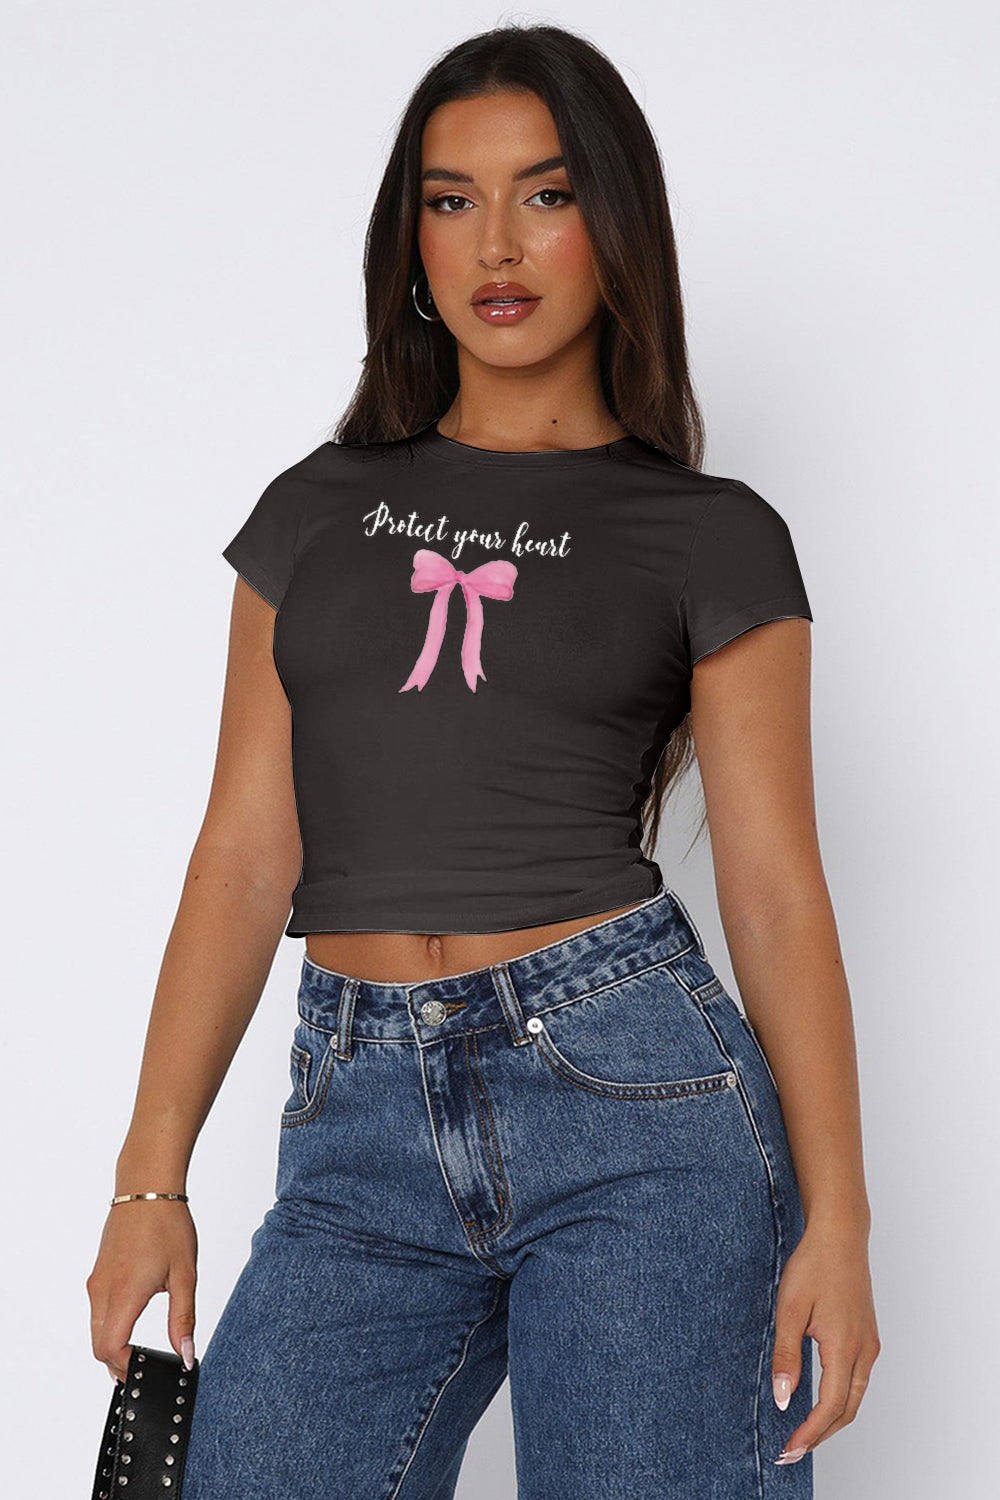 A woman wearing a fitted, crew-neck graphic t-shirt with the phrase "Protect your heart" above a ribbon design, paired with casual denim jeans and accessorized with chic sunglasses and simple jewelry. The shirt has a cropped cut, offering a modern and stylish look.